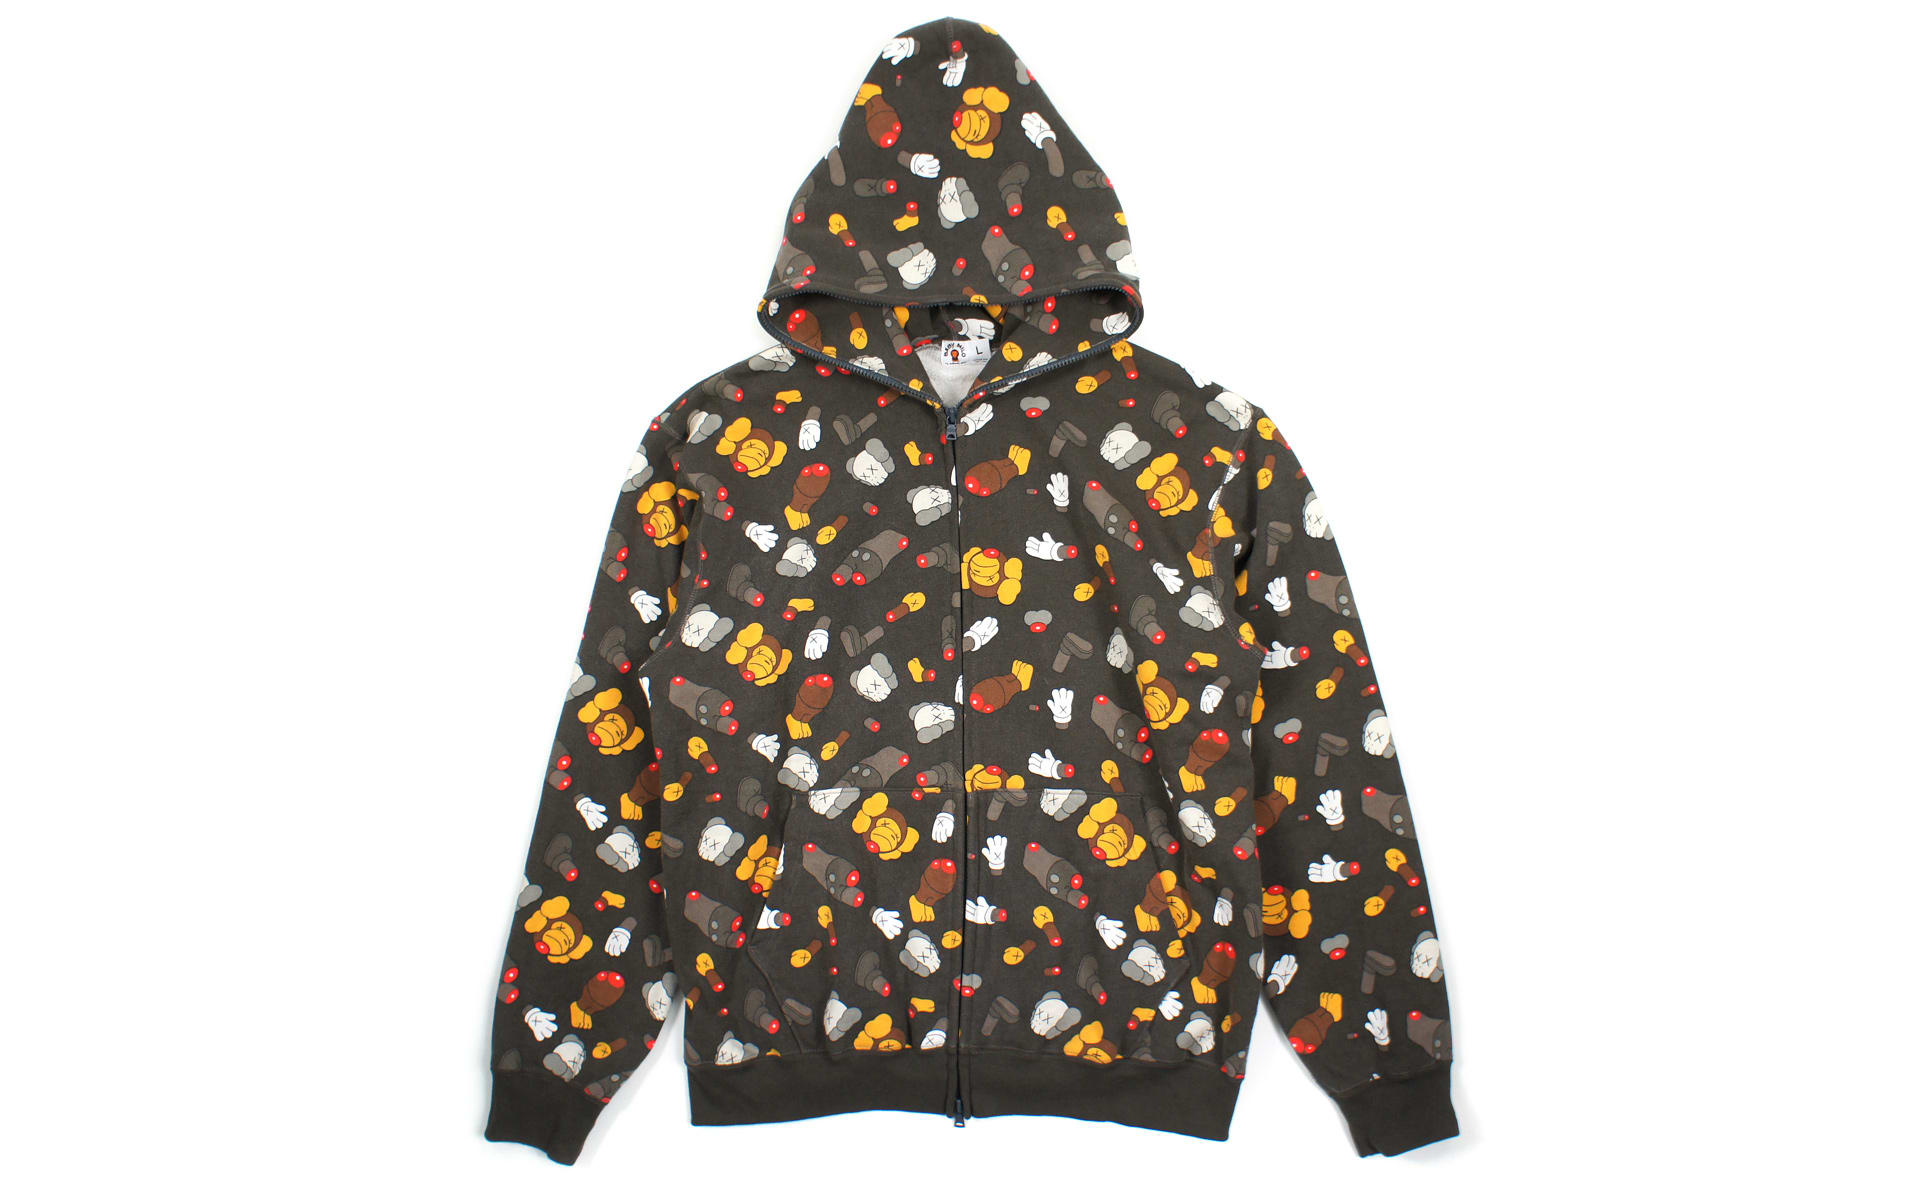 The 25 Best Bape Items of all time. Let the debates begin. | Complex